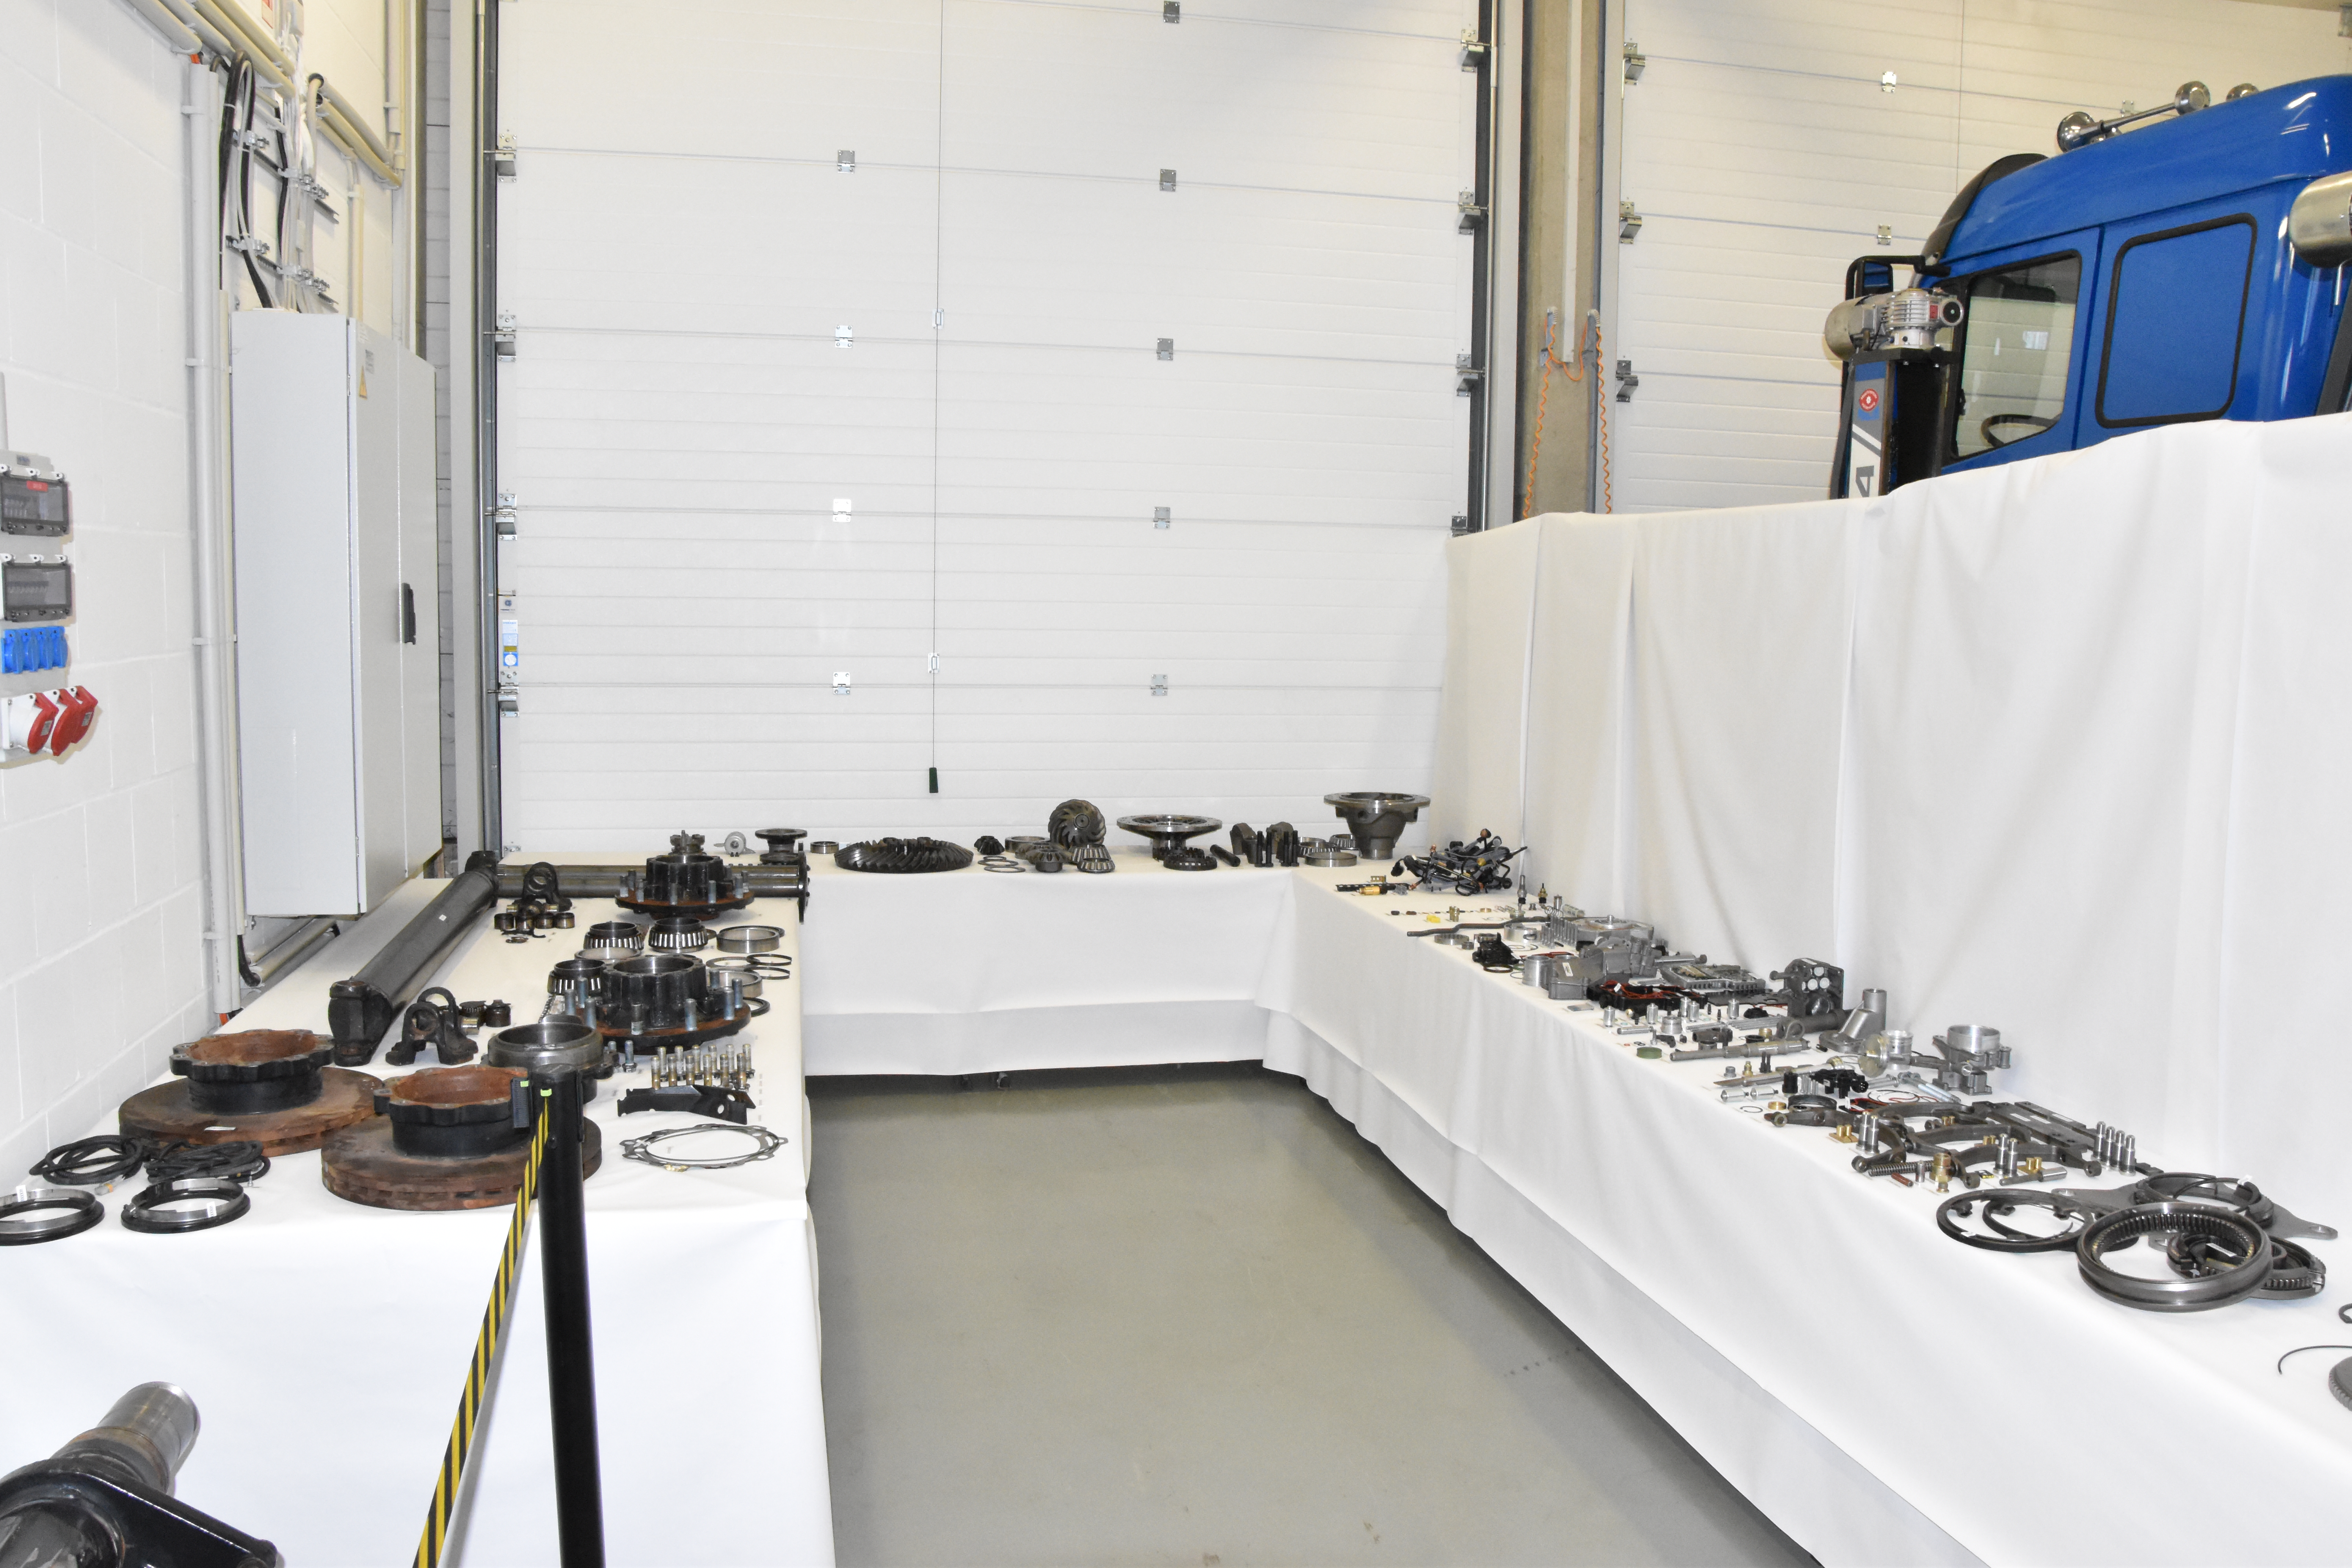 Exhibition Commercial Vehicle Components